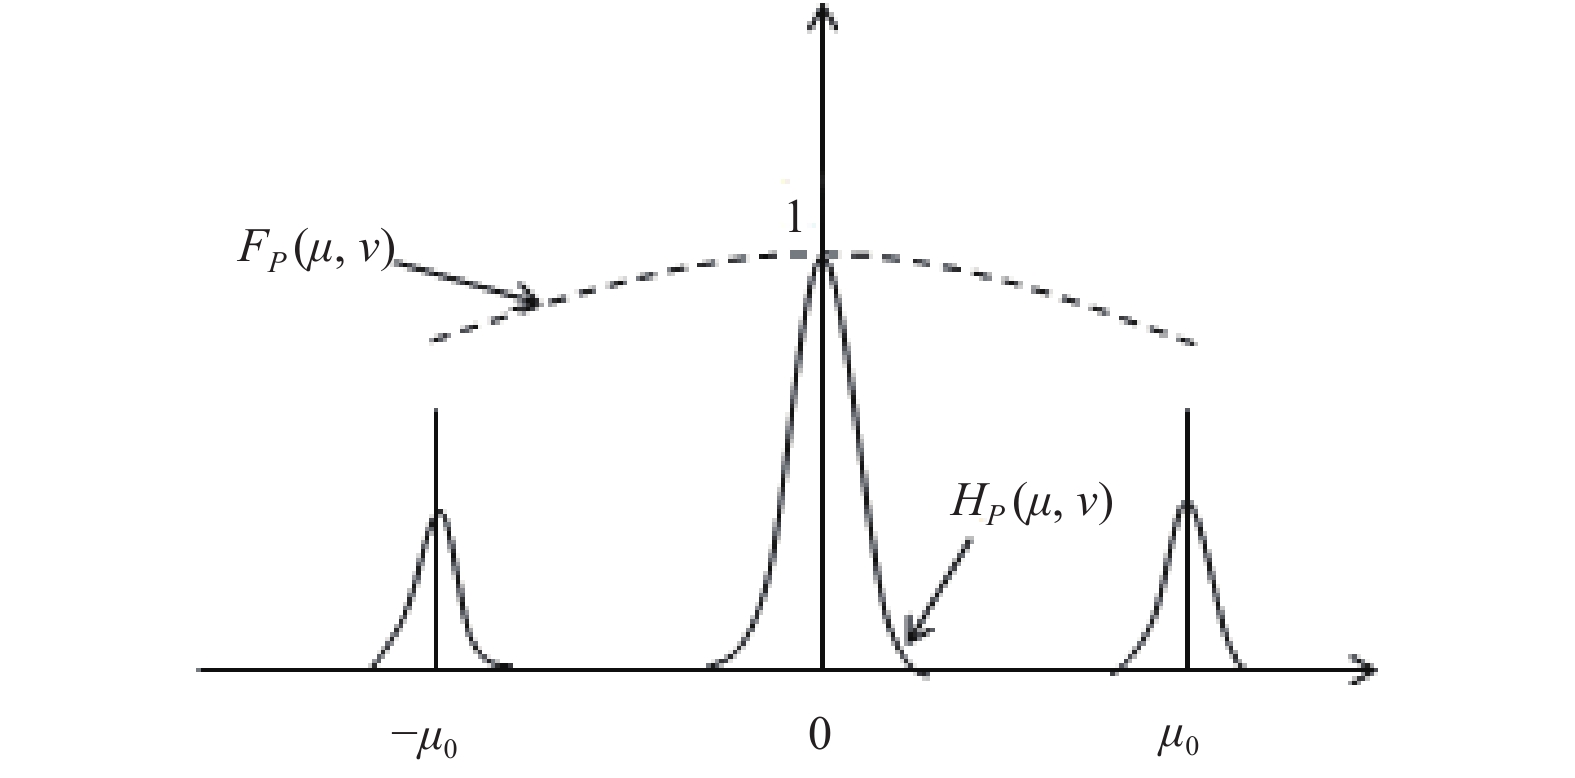 Distribution of typical power spectrum